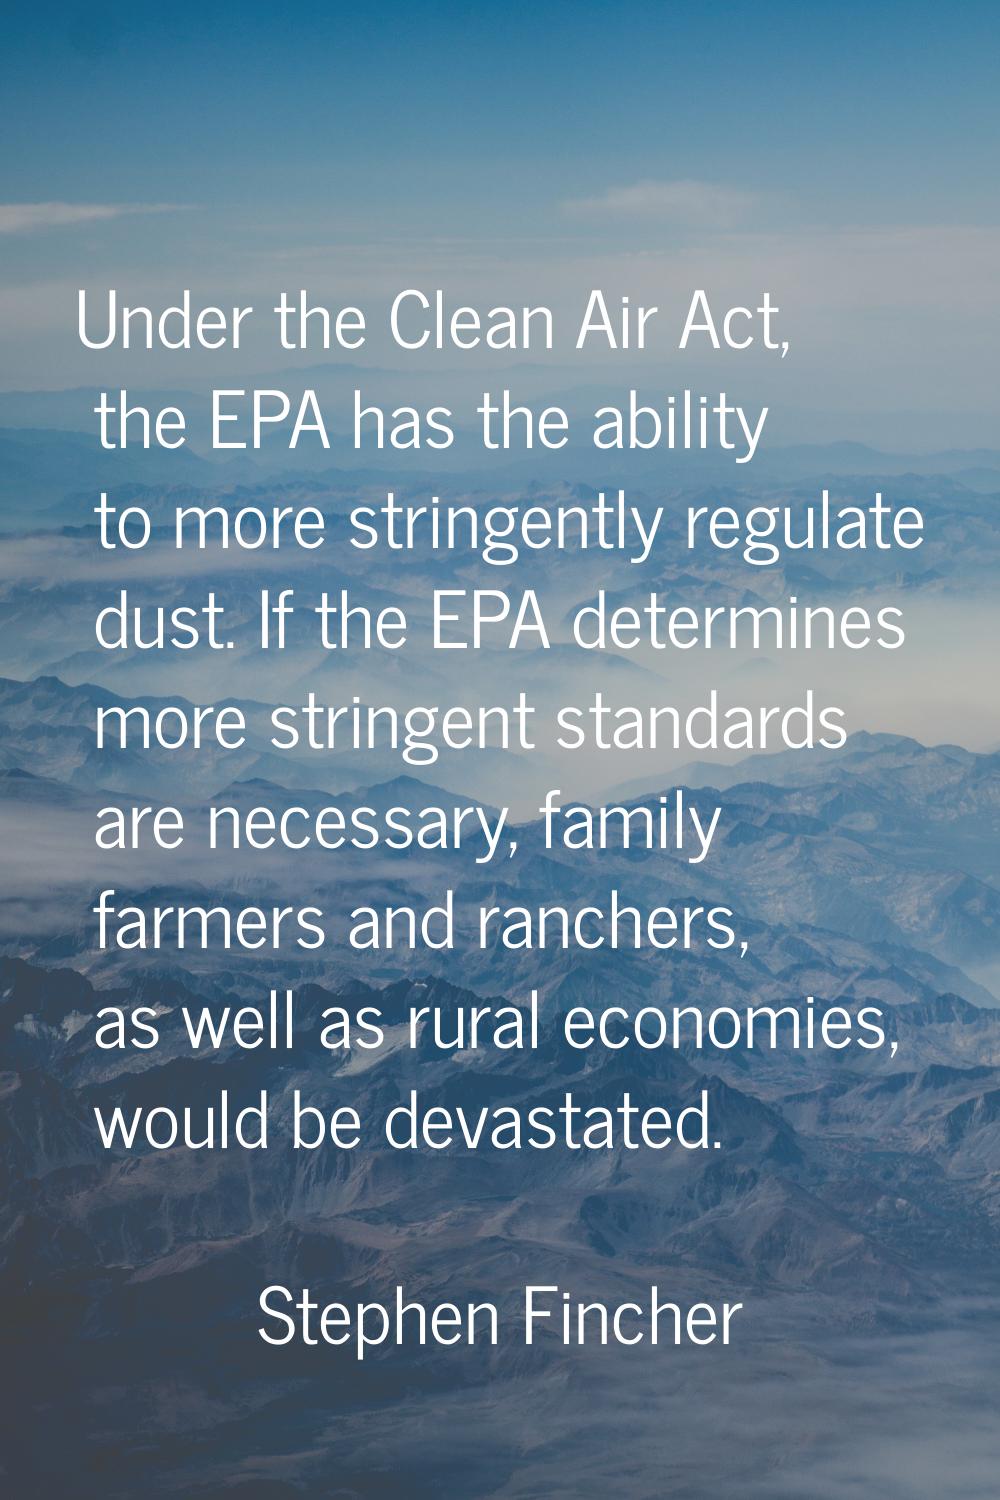 Under the Clean Air Act, the EPA has the ability to more stringently regulate dust. If the EPA dete